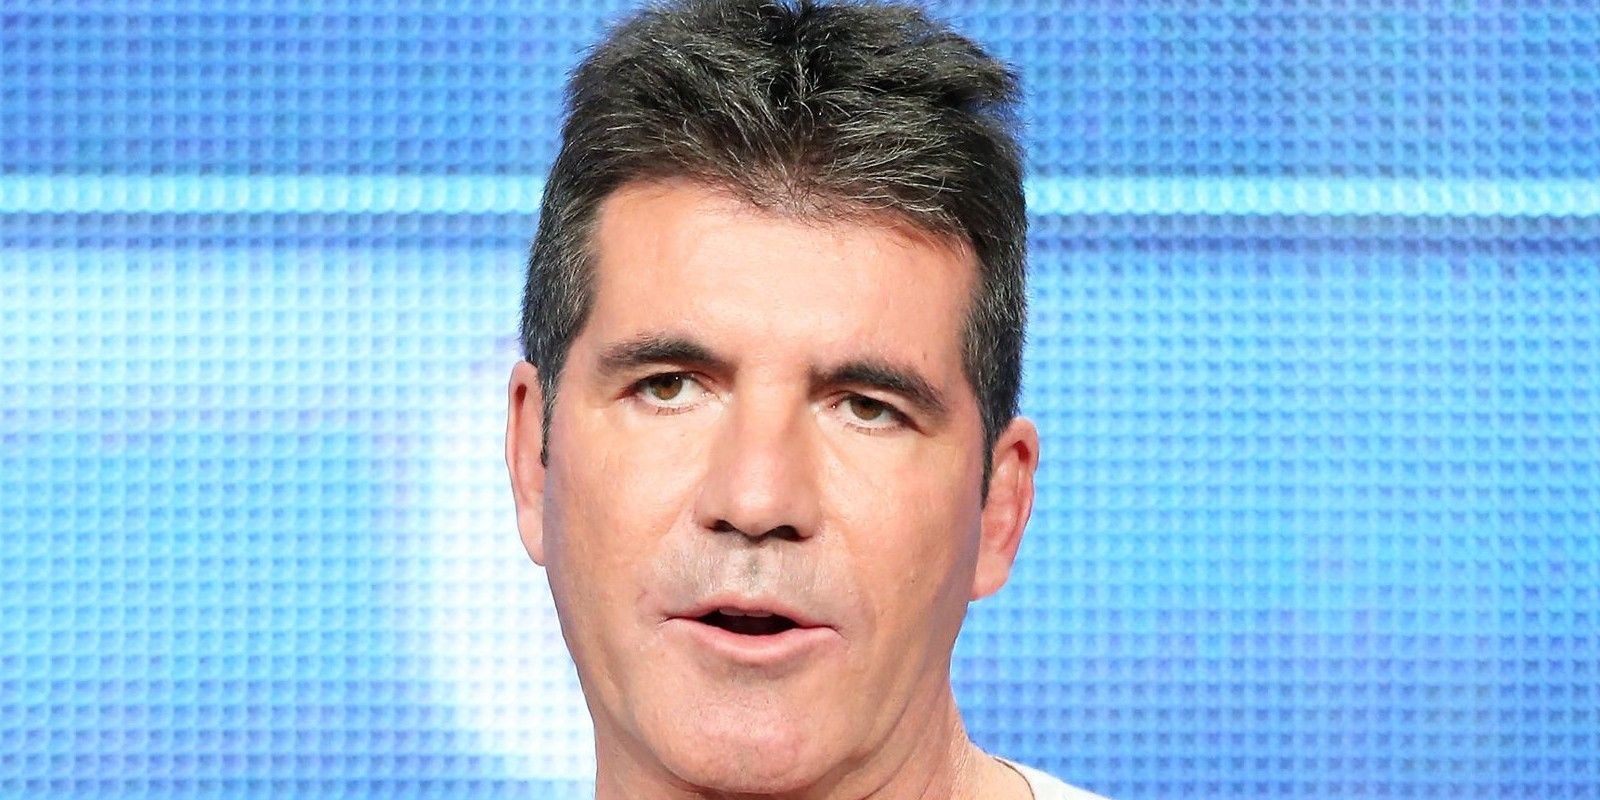 Simon has no interest in returning to American Idol, doesn't watch show